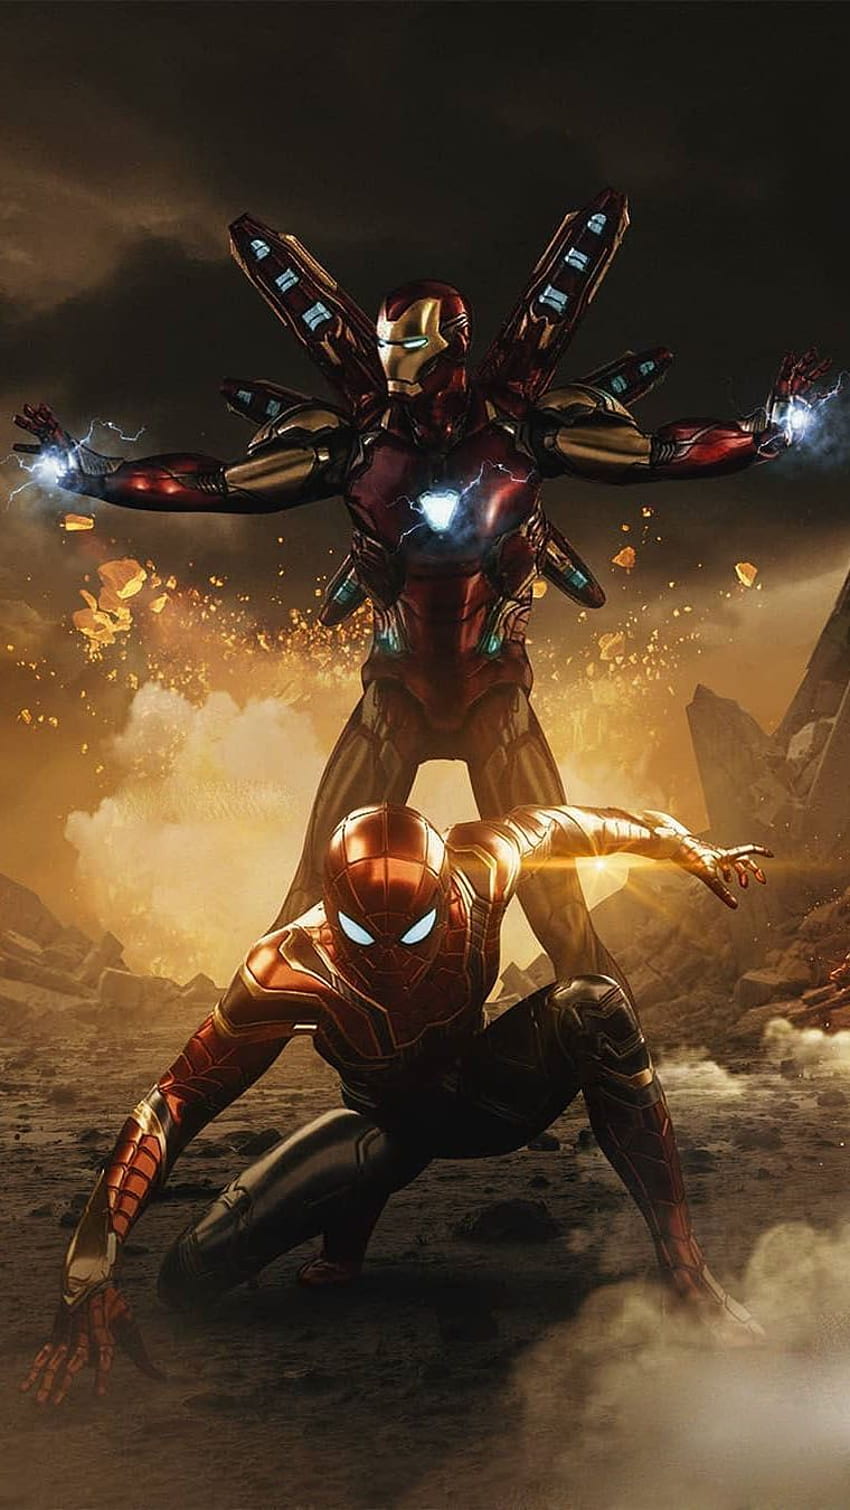 Iron Spidey and Iron Man iPhone - iPhone . Iron man avengers, Marvel superheroes, Iron man, Spider Man End Game HD phone wallpaper